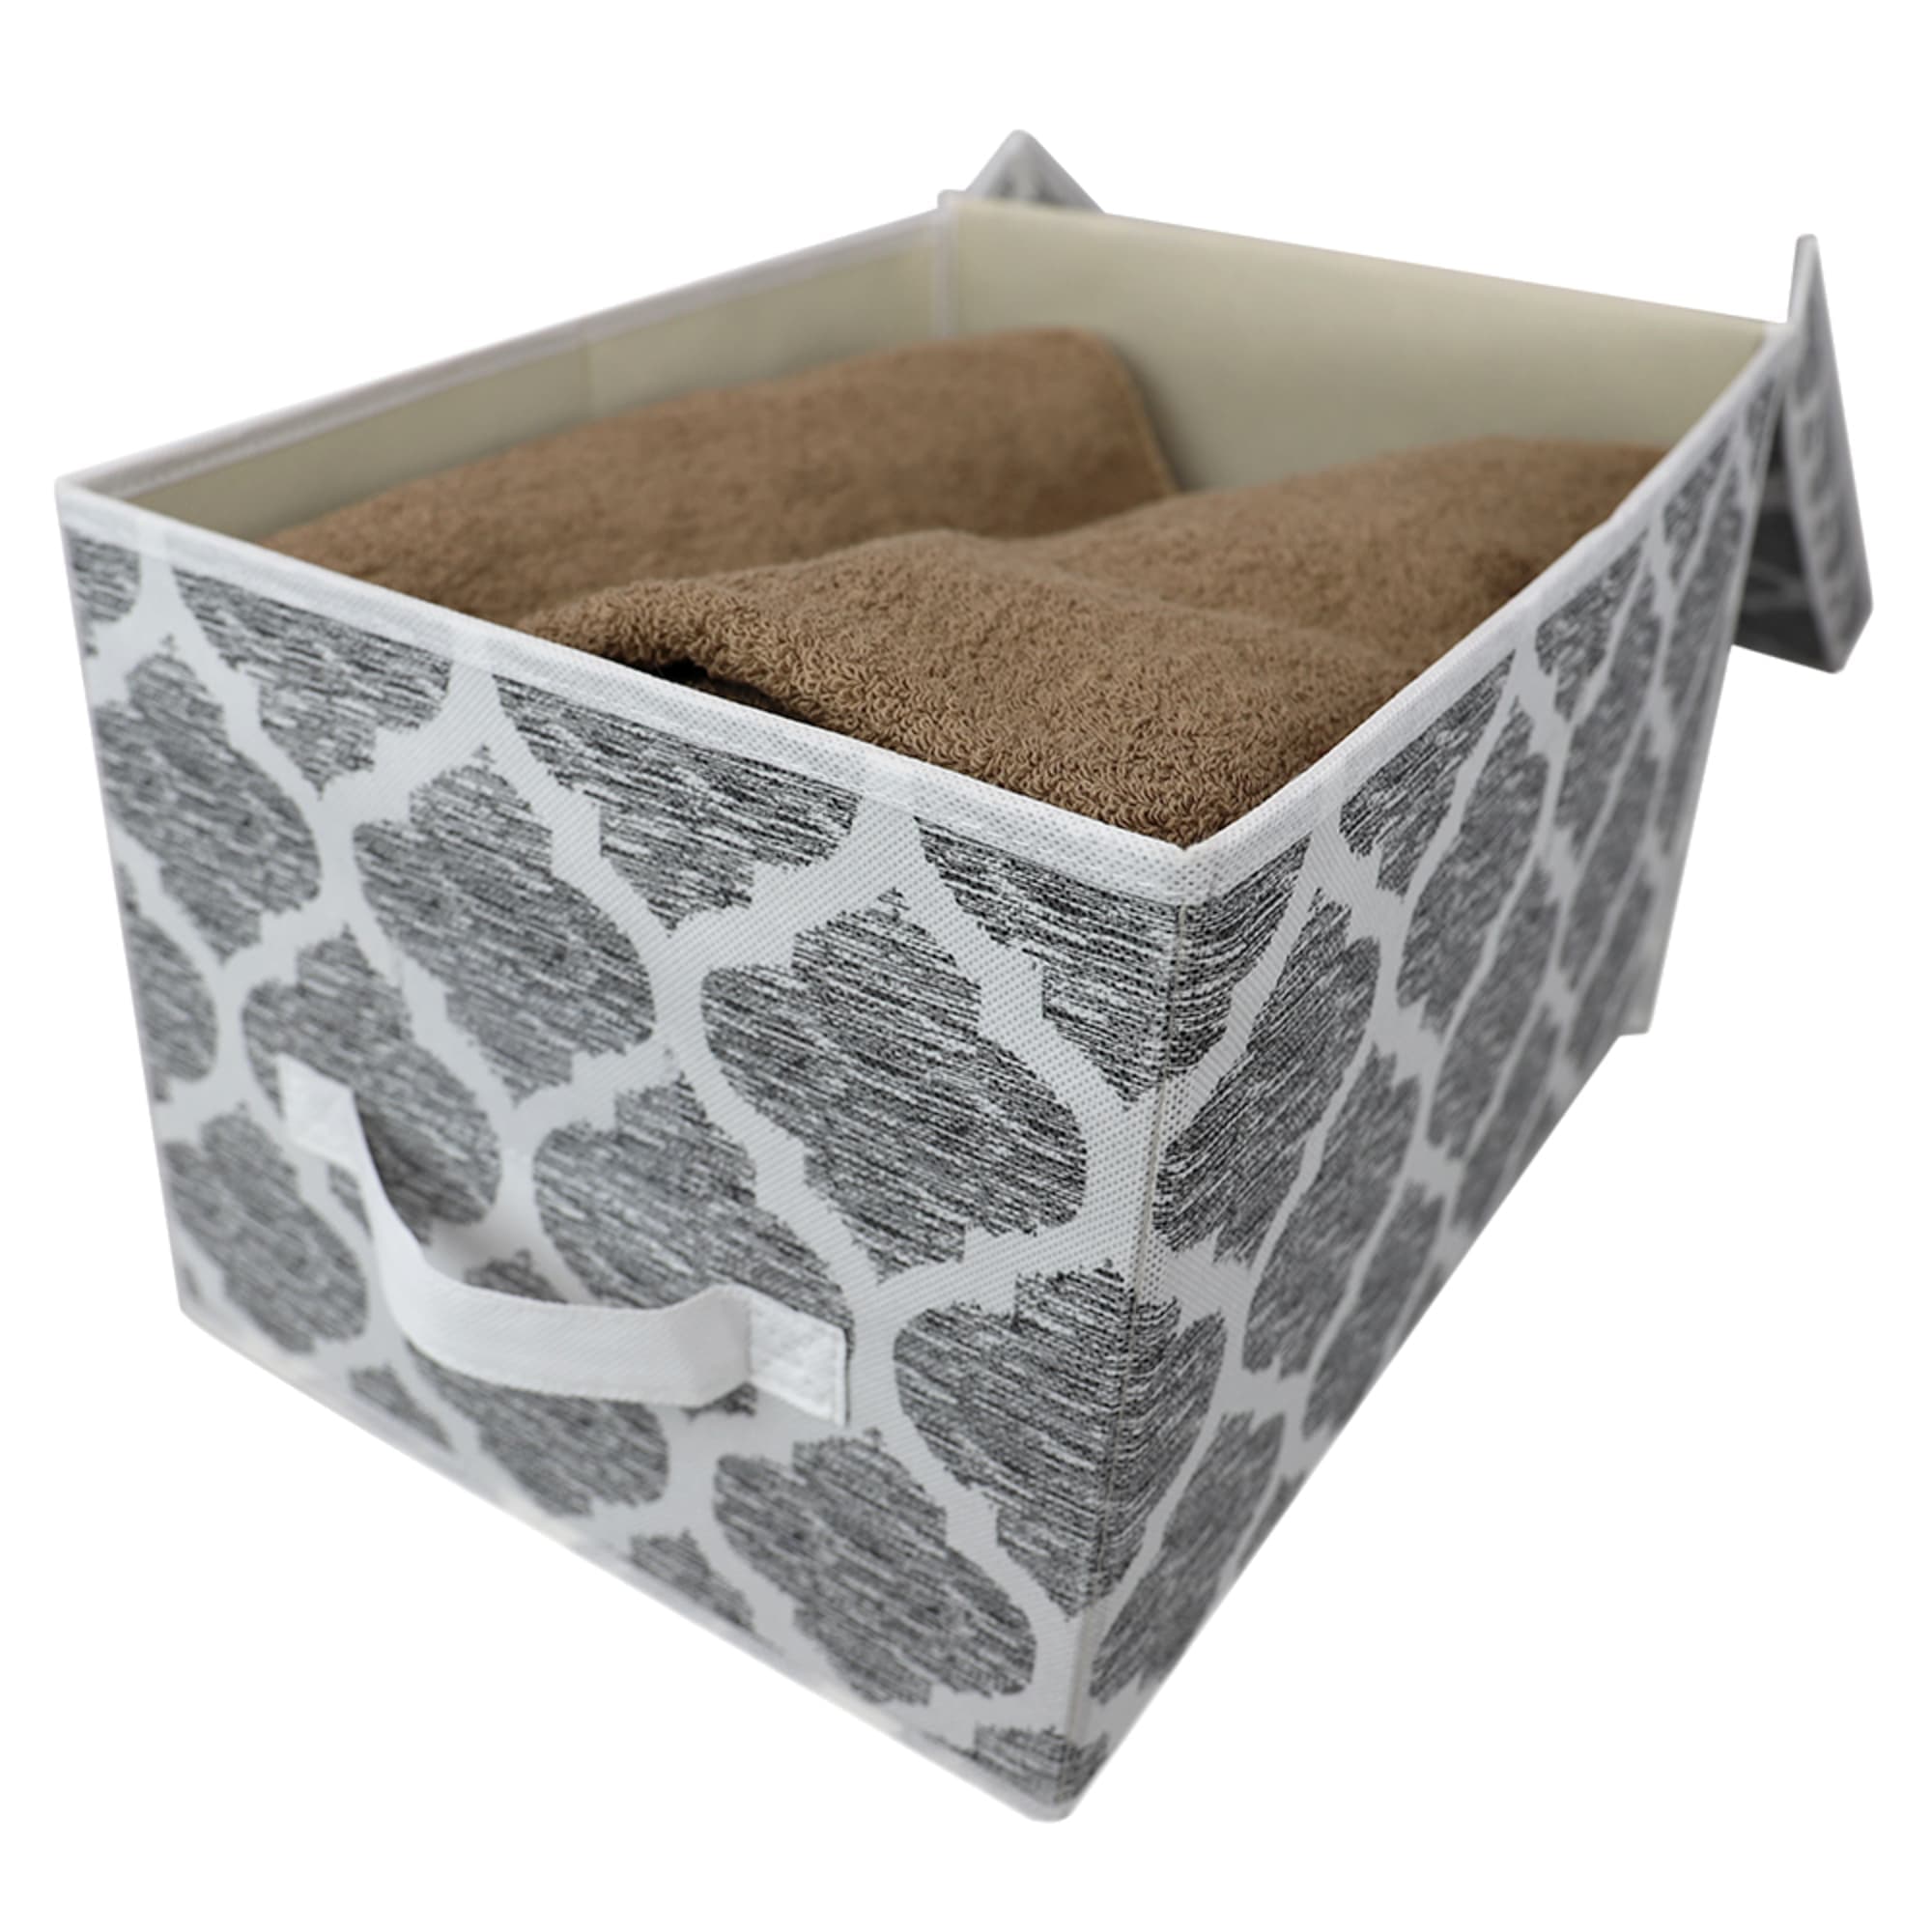 Home Basics Arabesque Large Non-Woven Storage Box with Label Window, Grey $5.00 EACH, CASE PACK OF 12